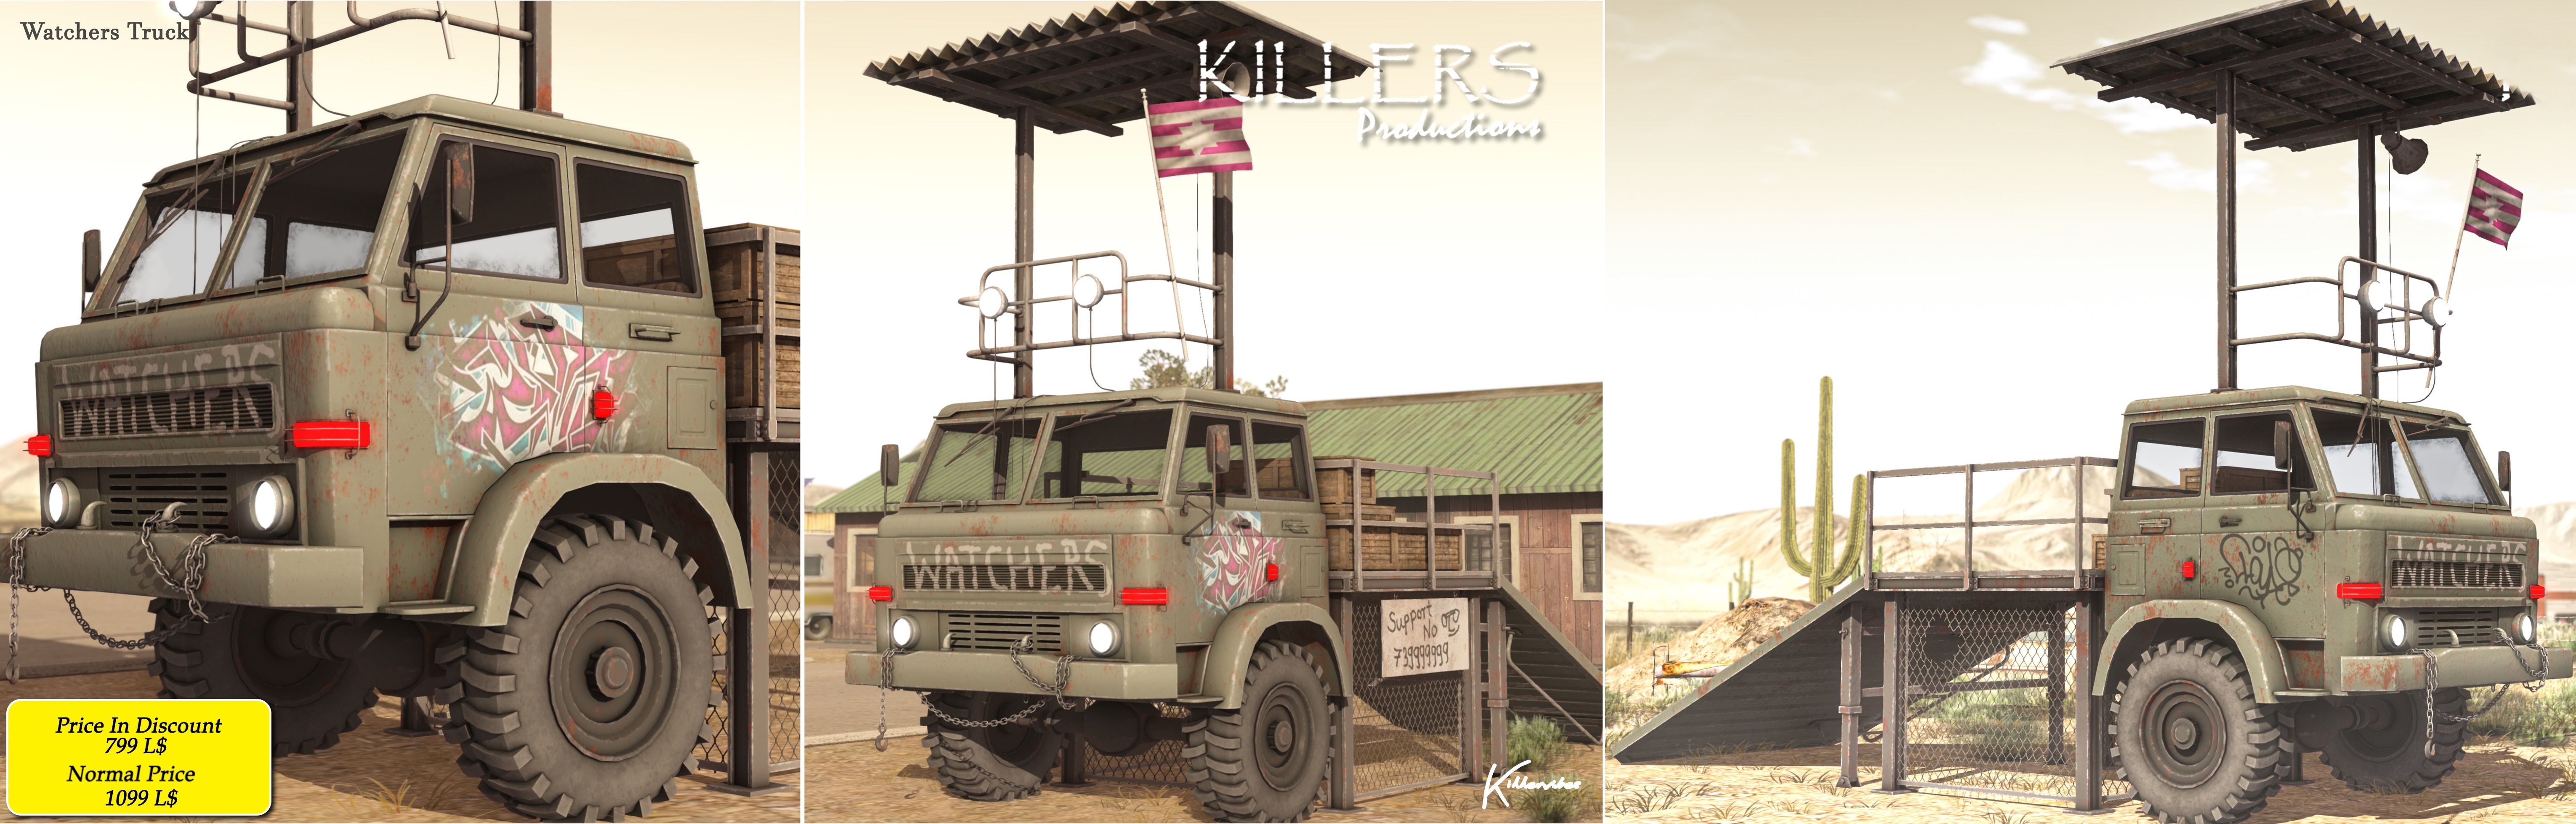 Killers Productions – Watchers Truck